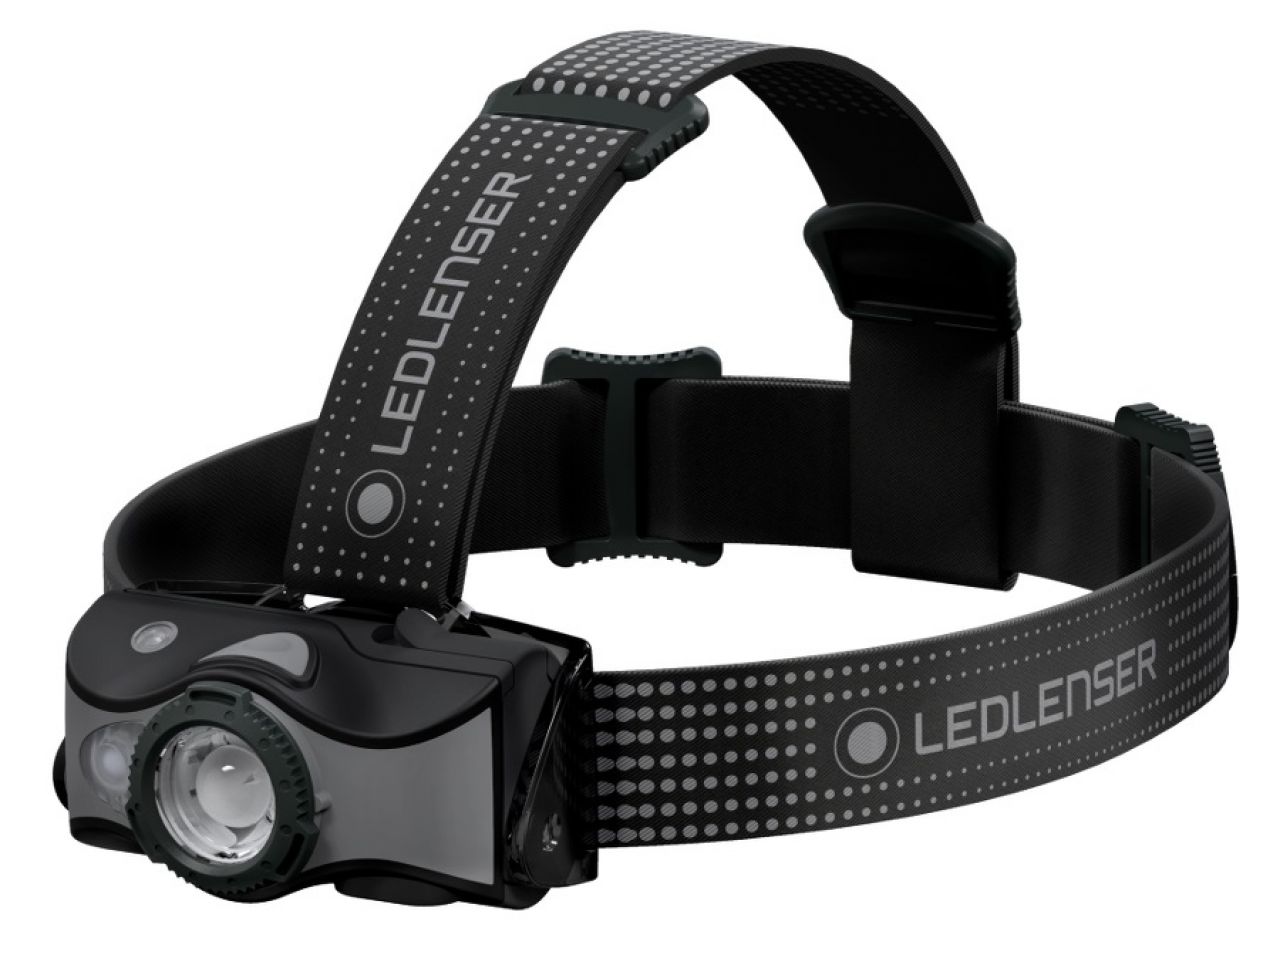 LED LENSER LAMPE FRONTALE MH7 NOIRE Lampe frontale rechargeable